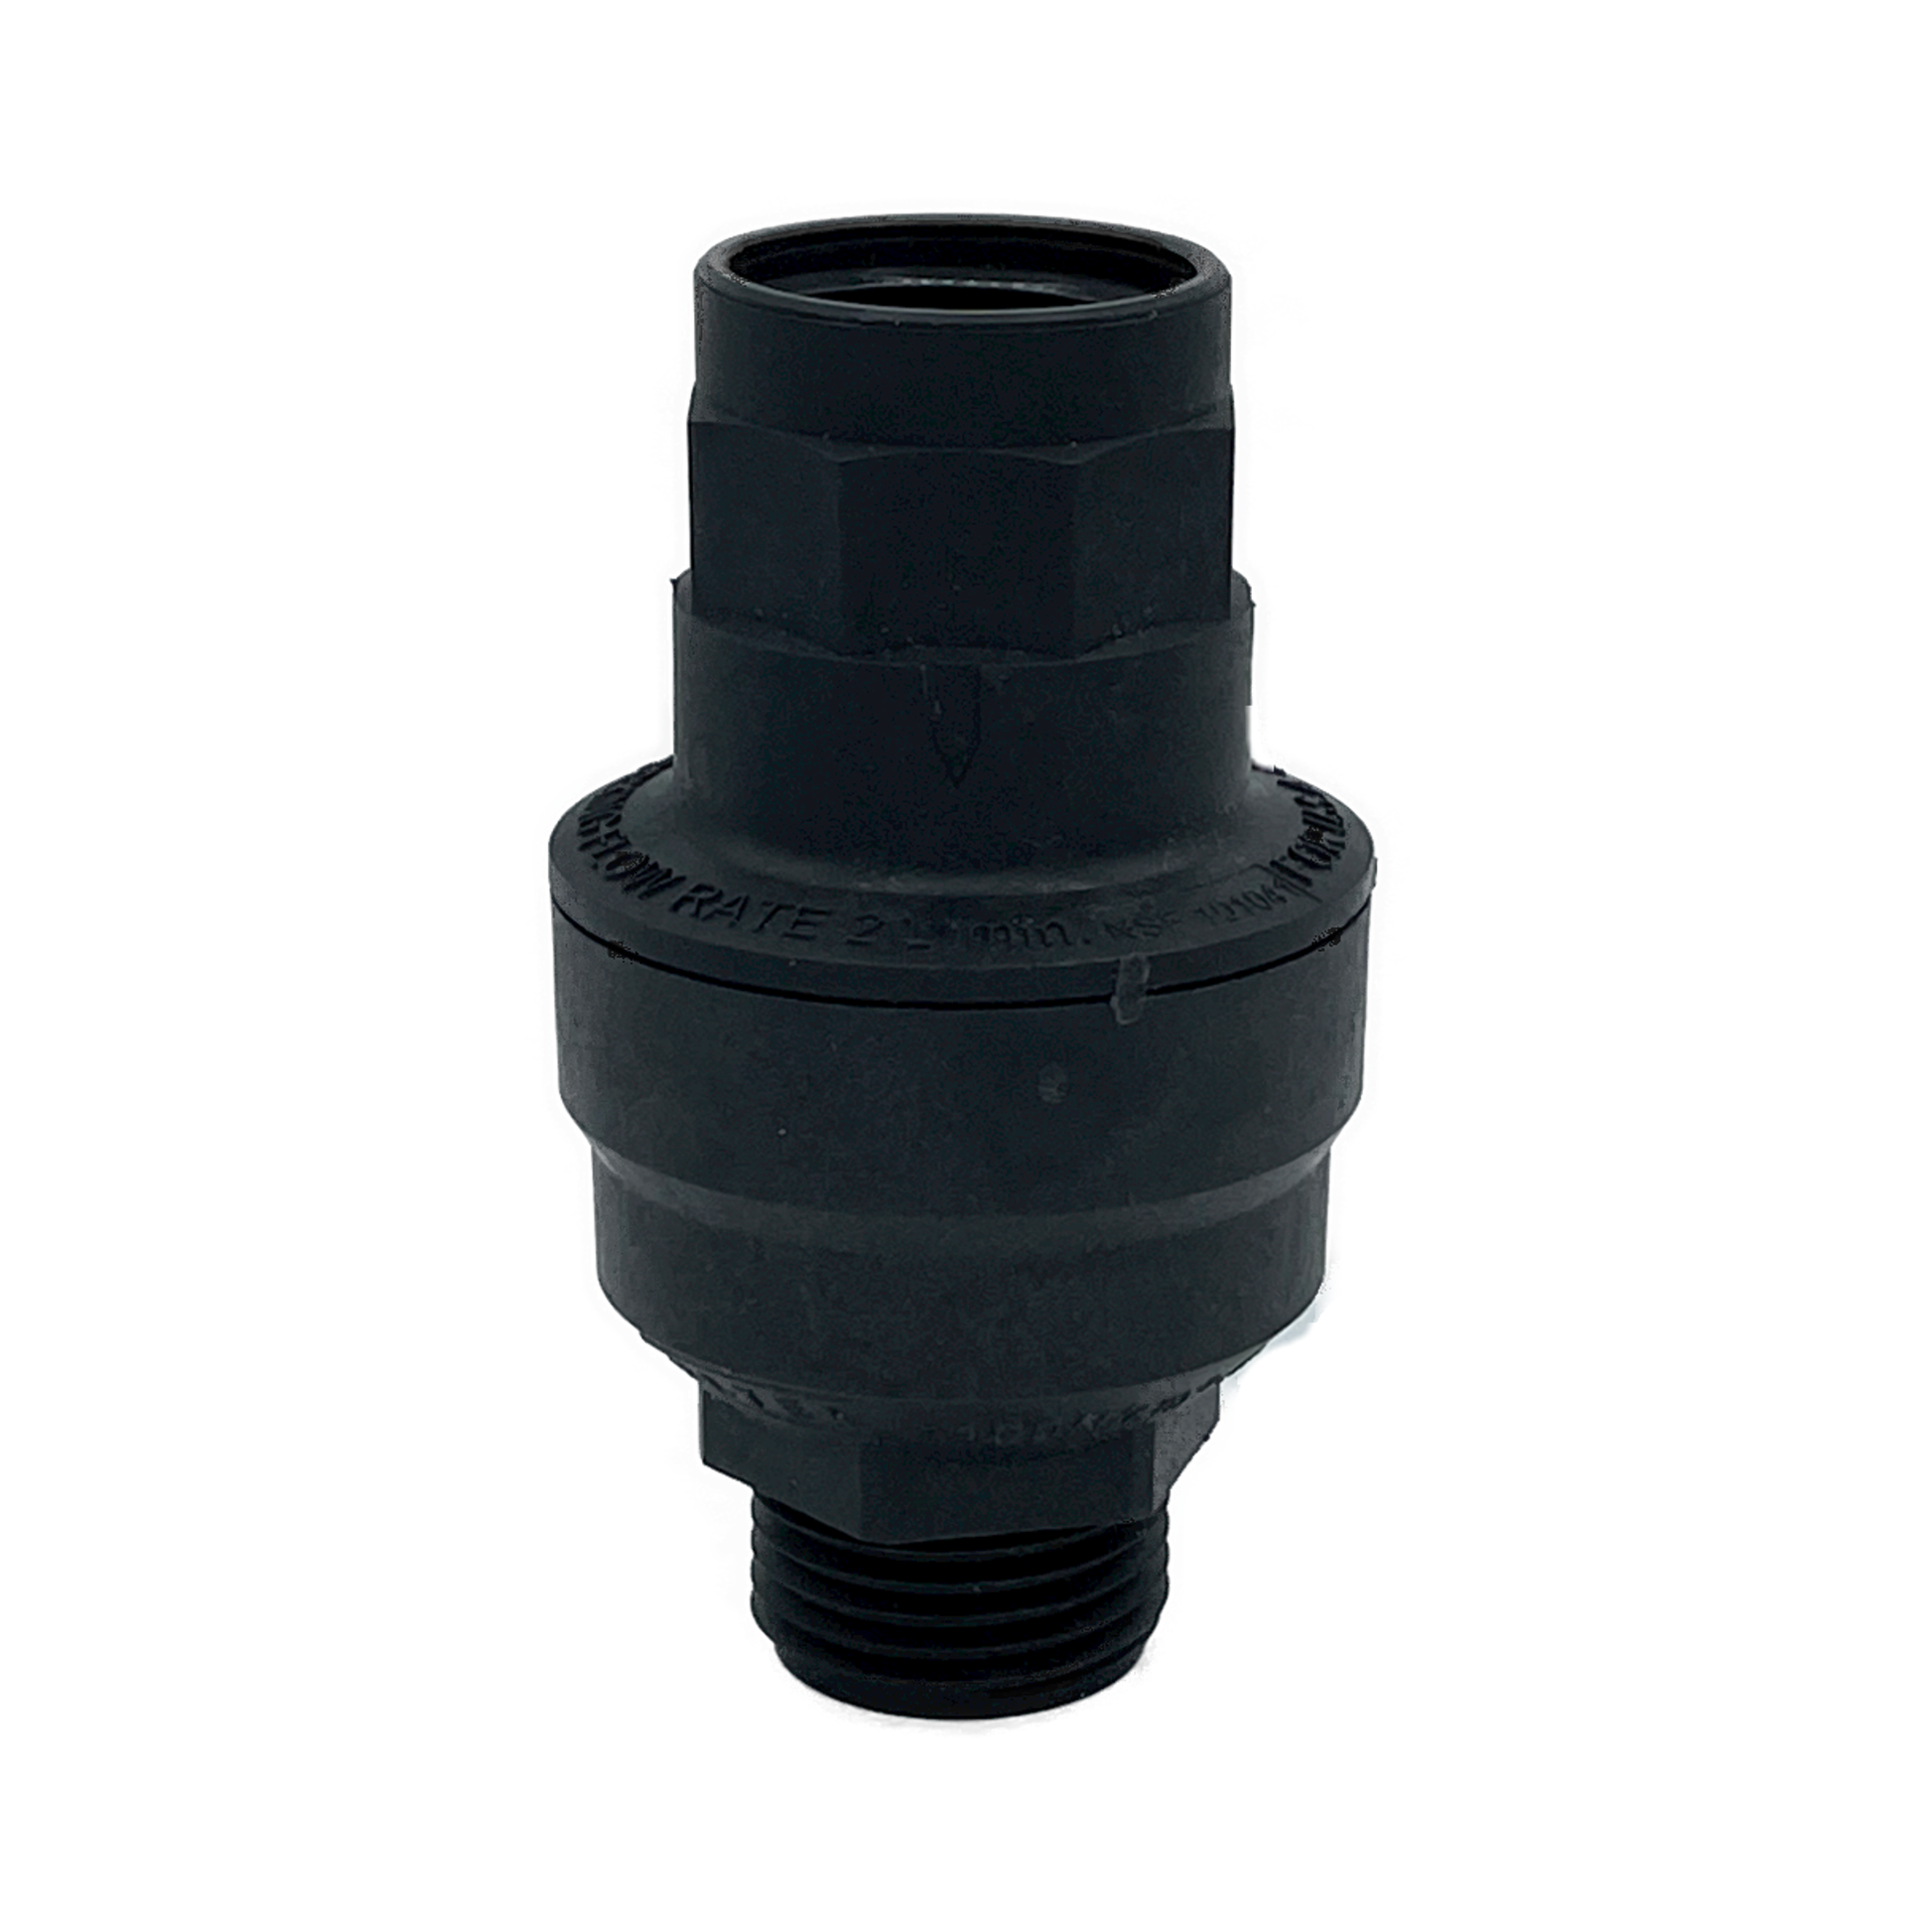 Water blocker device that stops water floods and will shut down flow through a pipe. 0.75 inch connection that can be adapted down to all smaller size lines through the use of different fittings. 